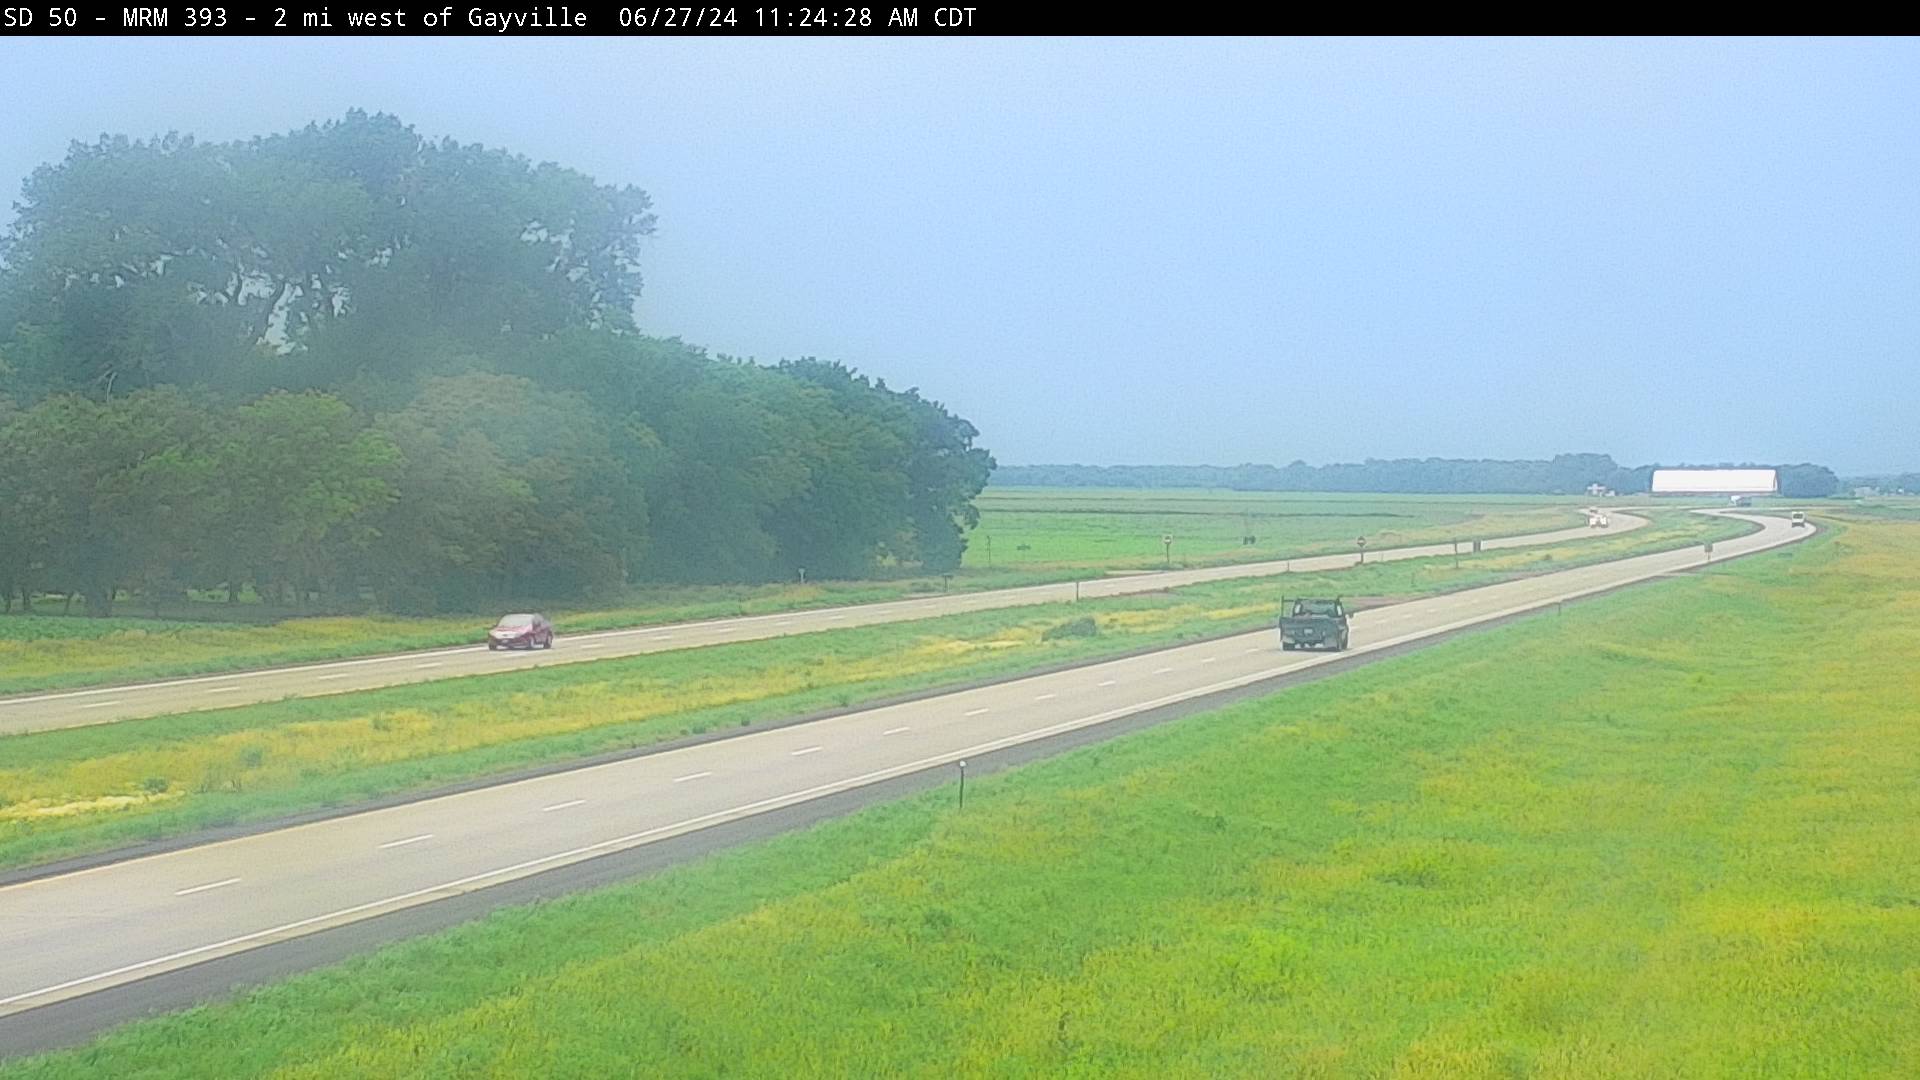 2 miles west of town along SD-50 @ MP 393 - West Traffic Camera